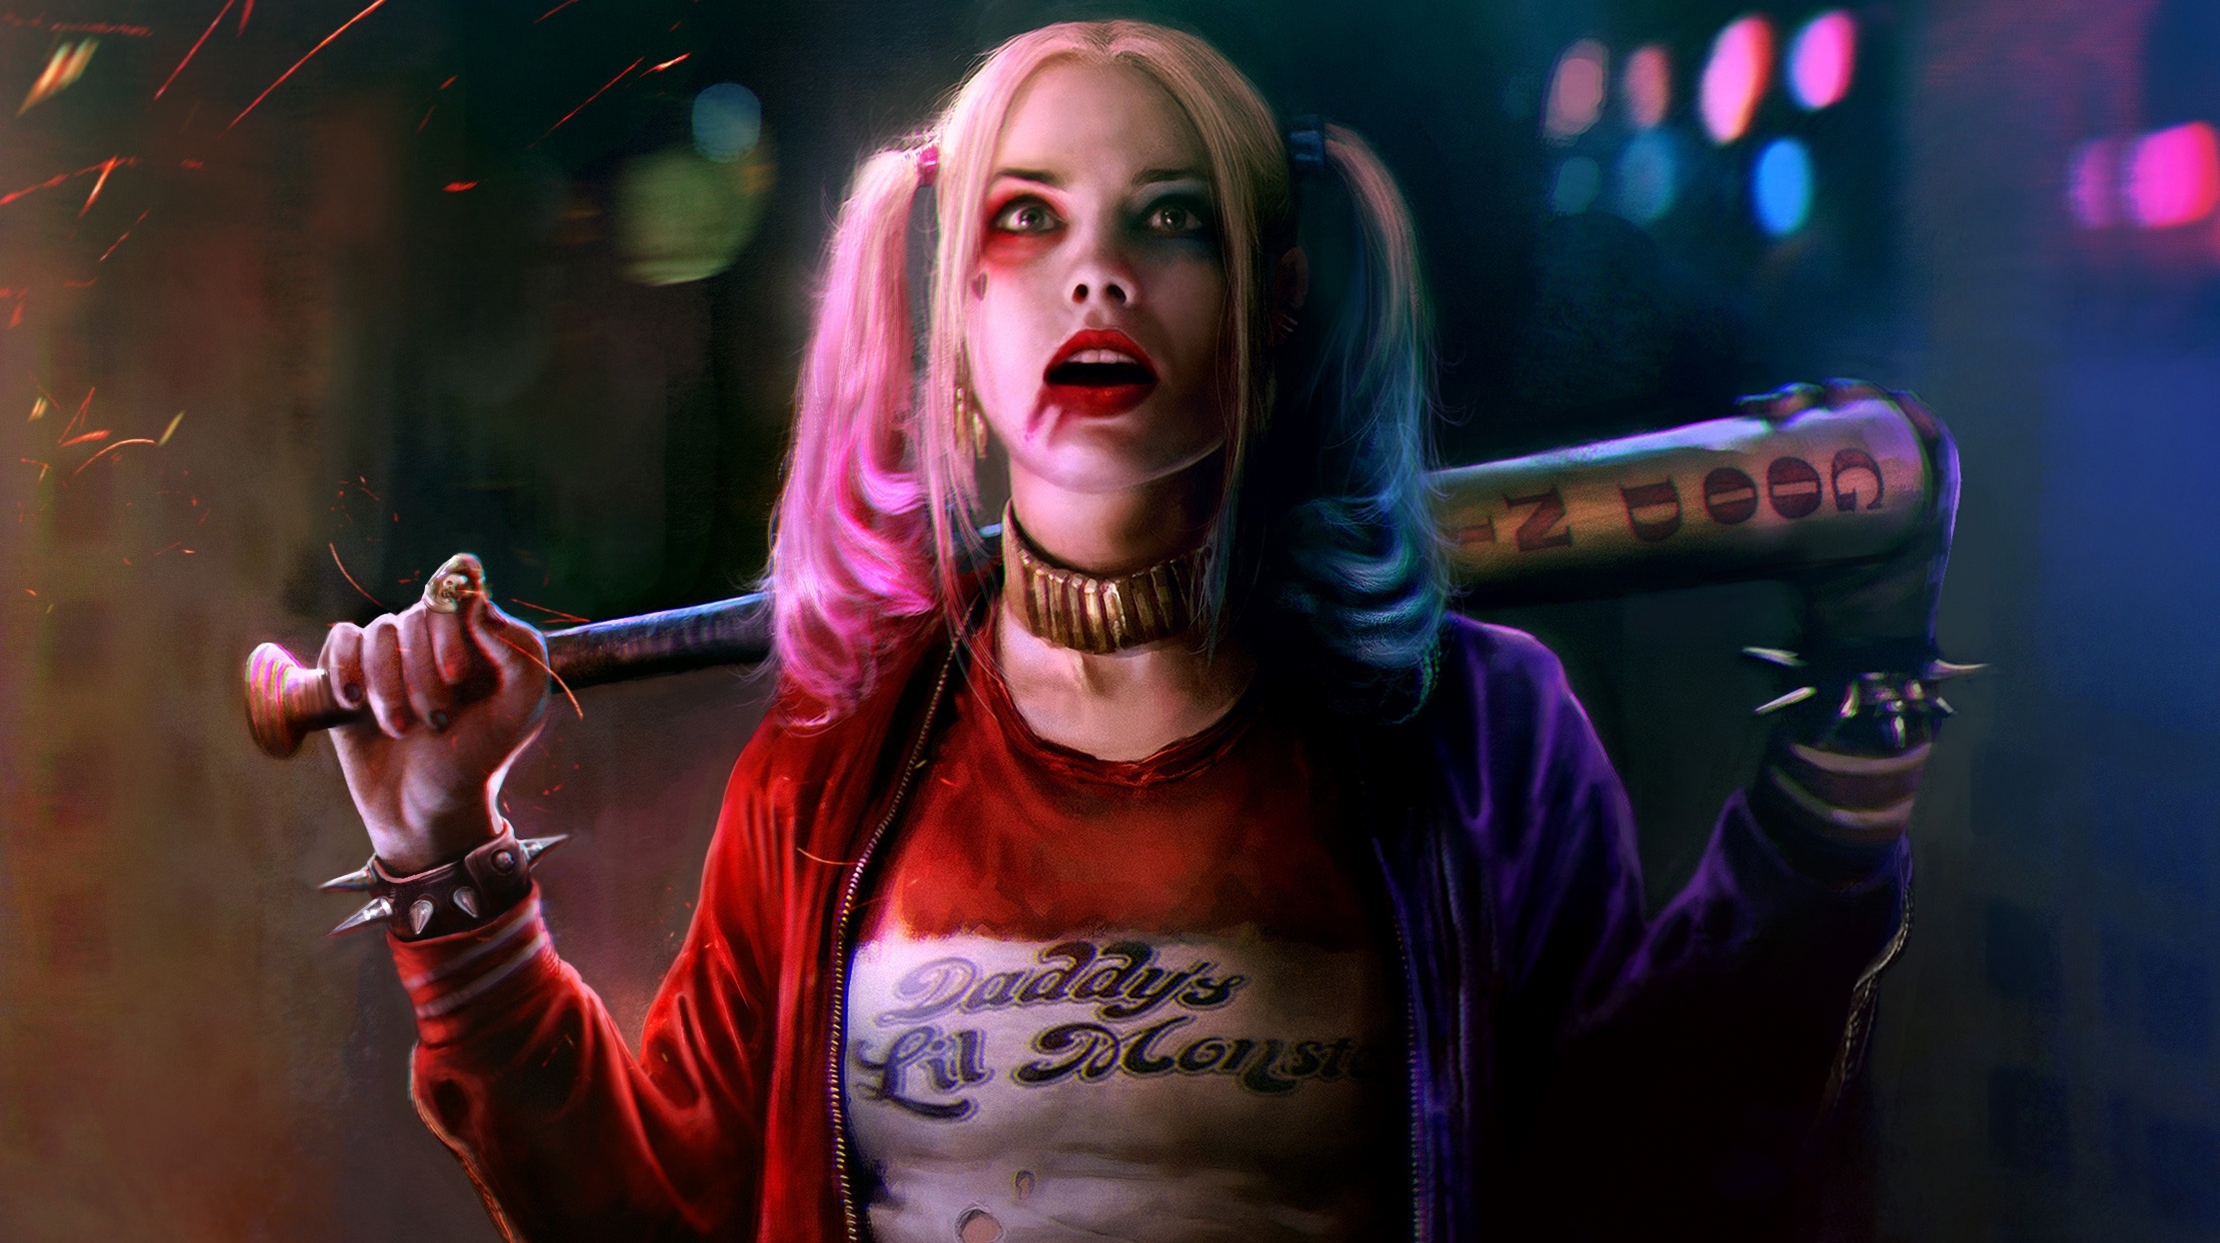 blonde, harley quinn, movie, collar, suicide squad, margot robbie, baseball bat, dc comics, spikes, two toned hair lock screen backgrounds